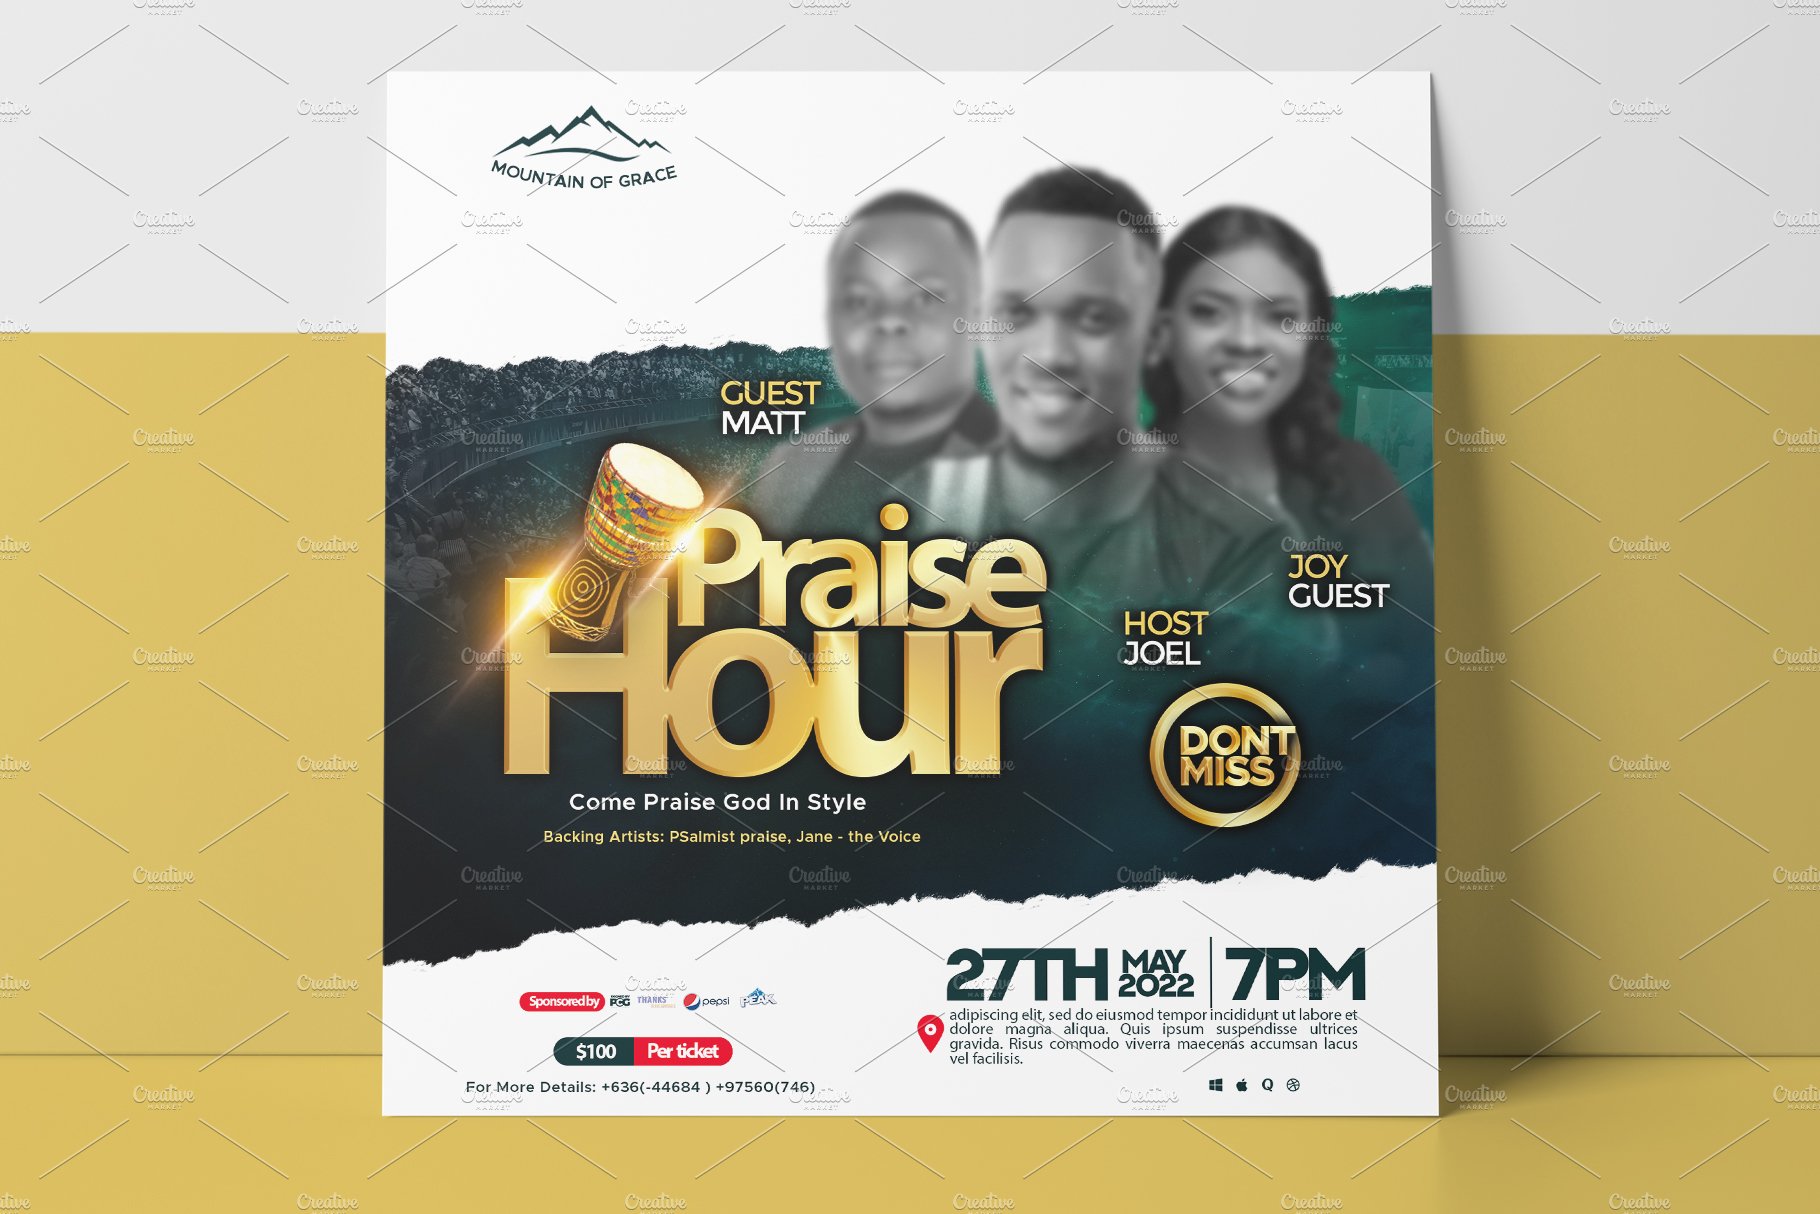 Hour of Praise church flyer concert preview image.